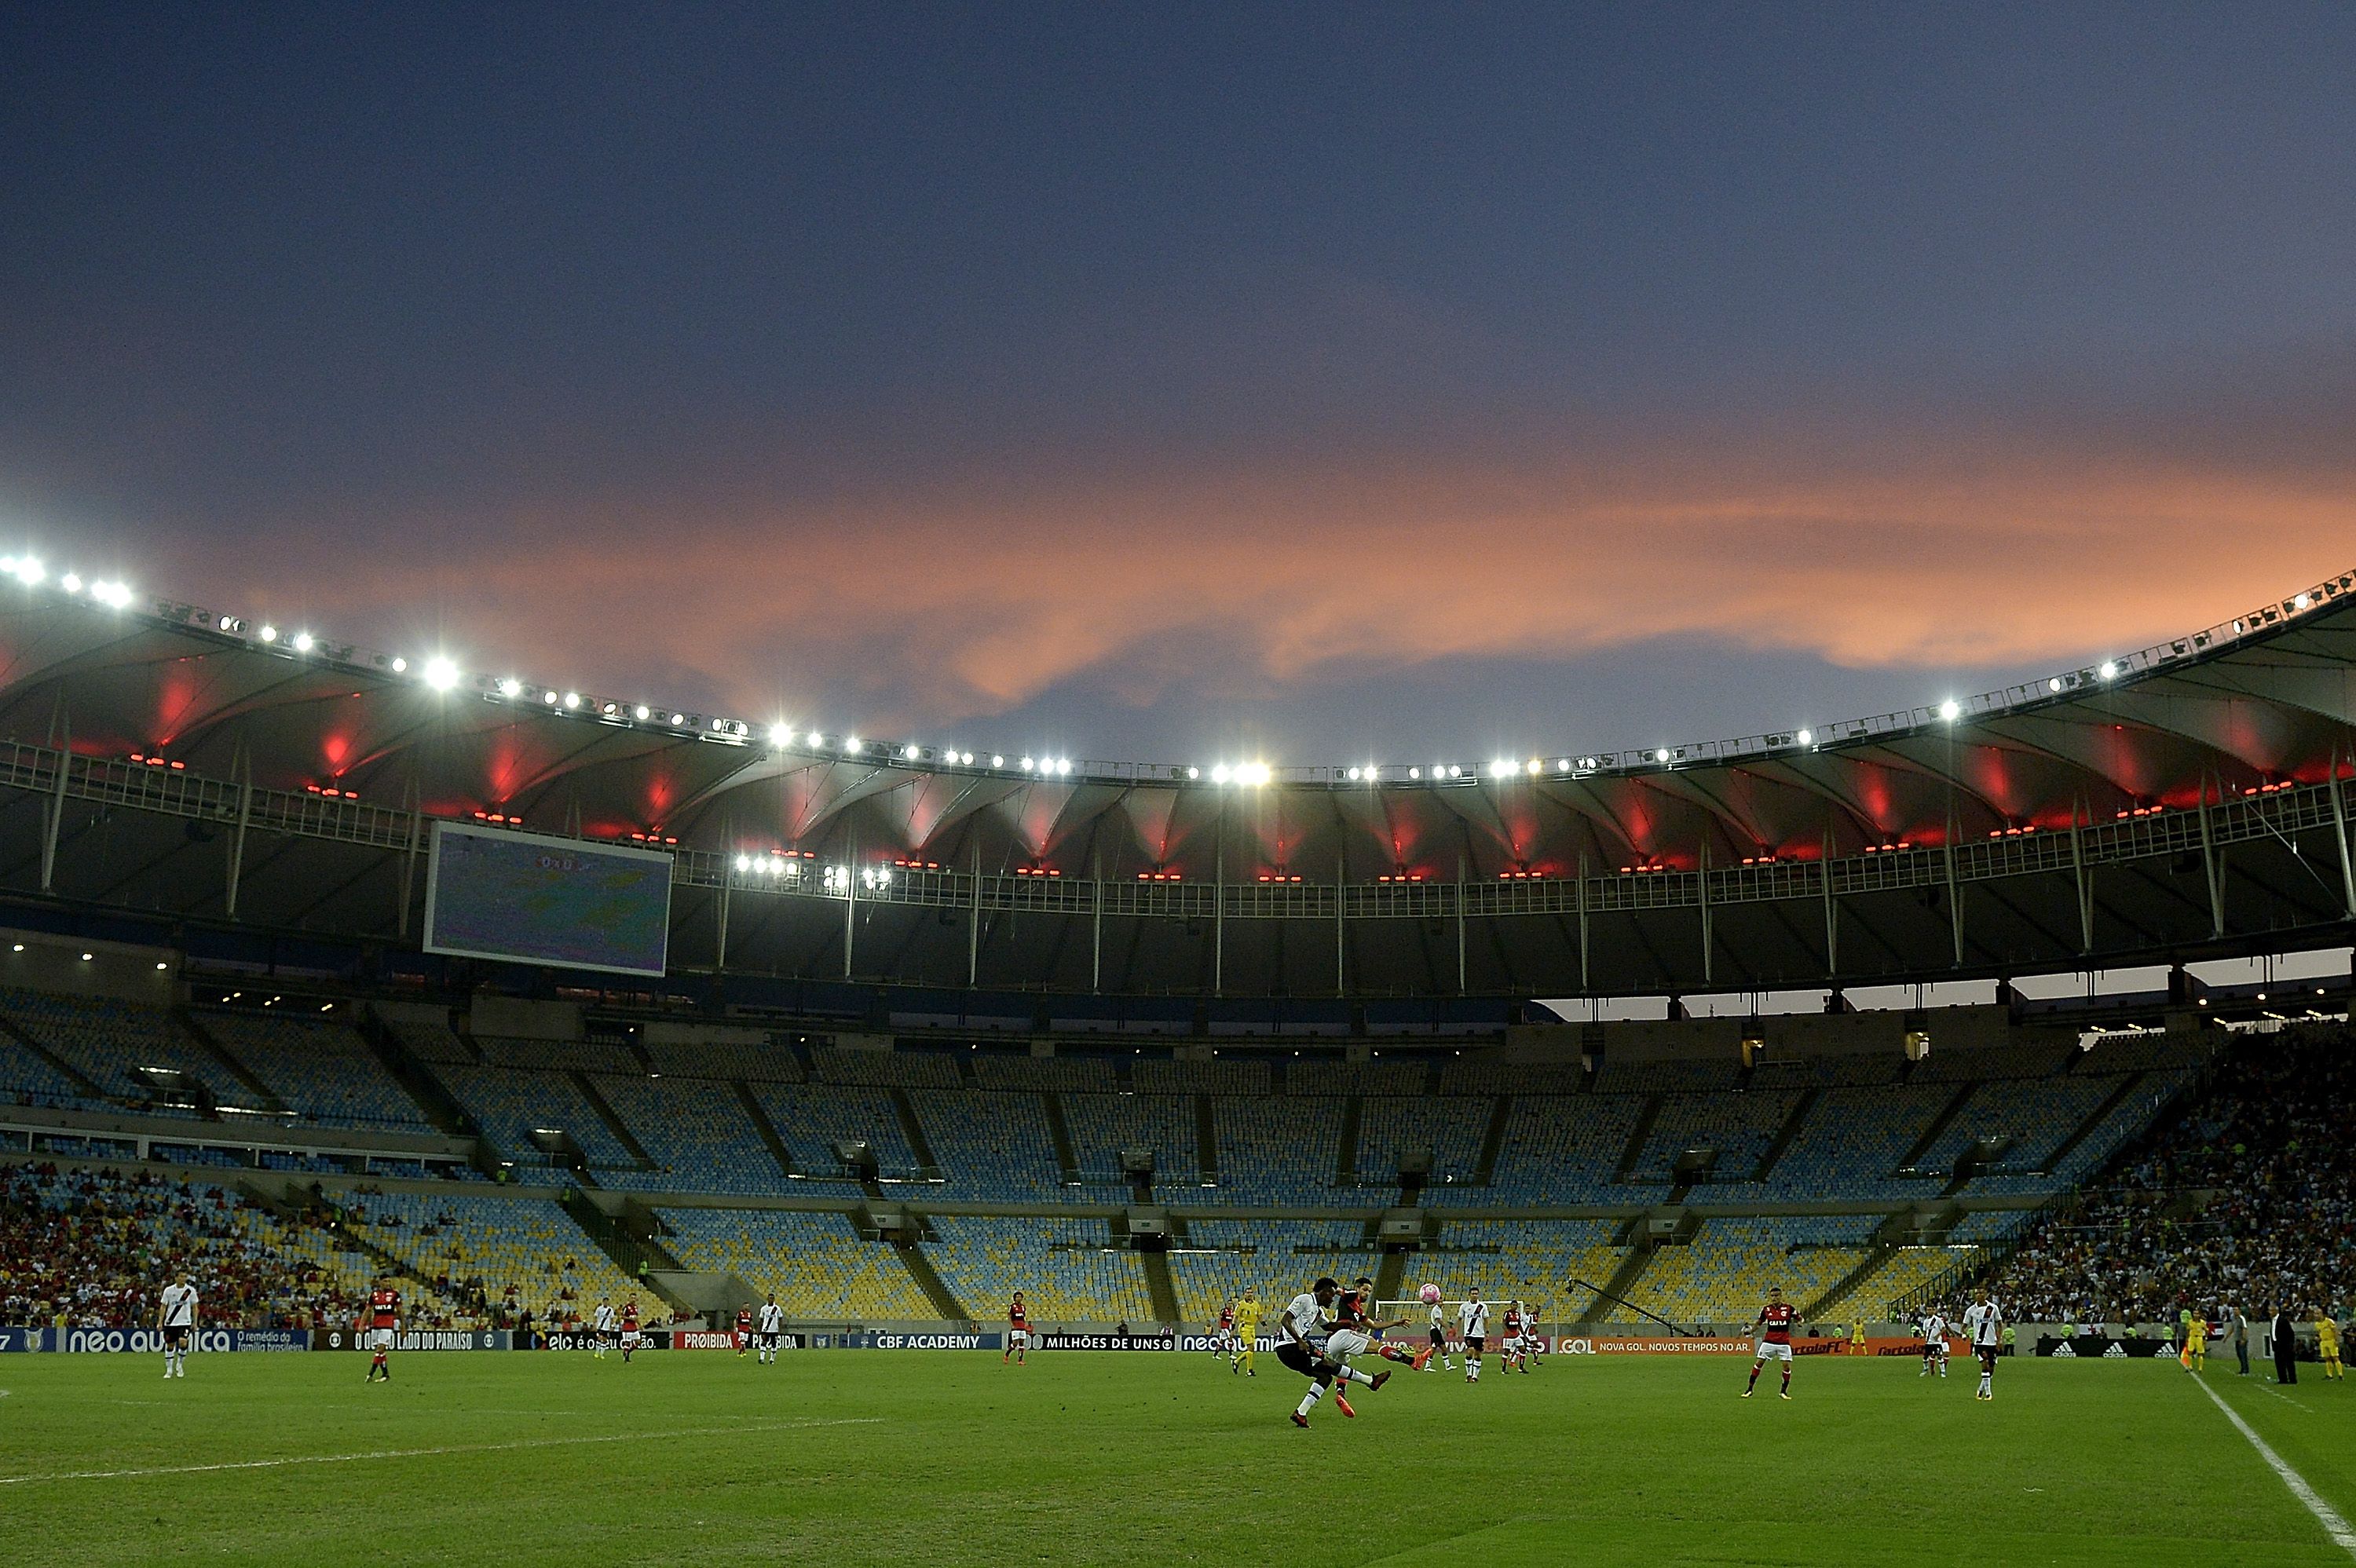 The Maracana Stadium will host Brazil's World Cup qualifier against Chile on Thursday 24th March 2022.